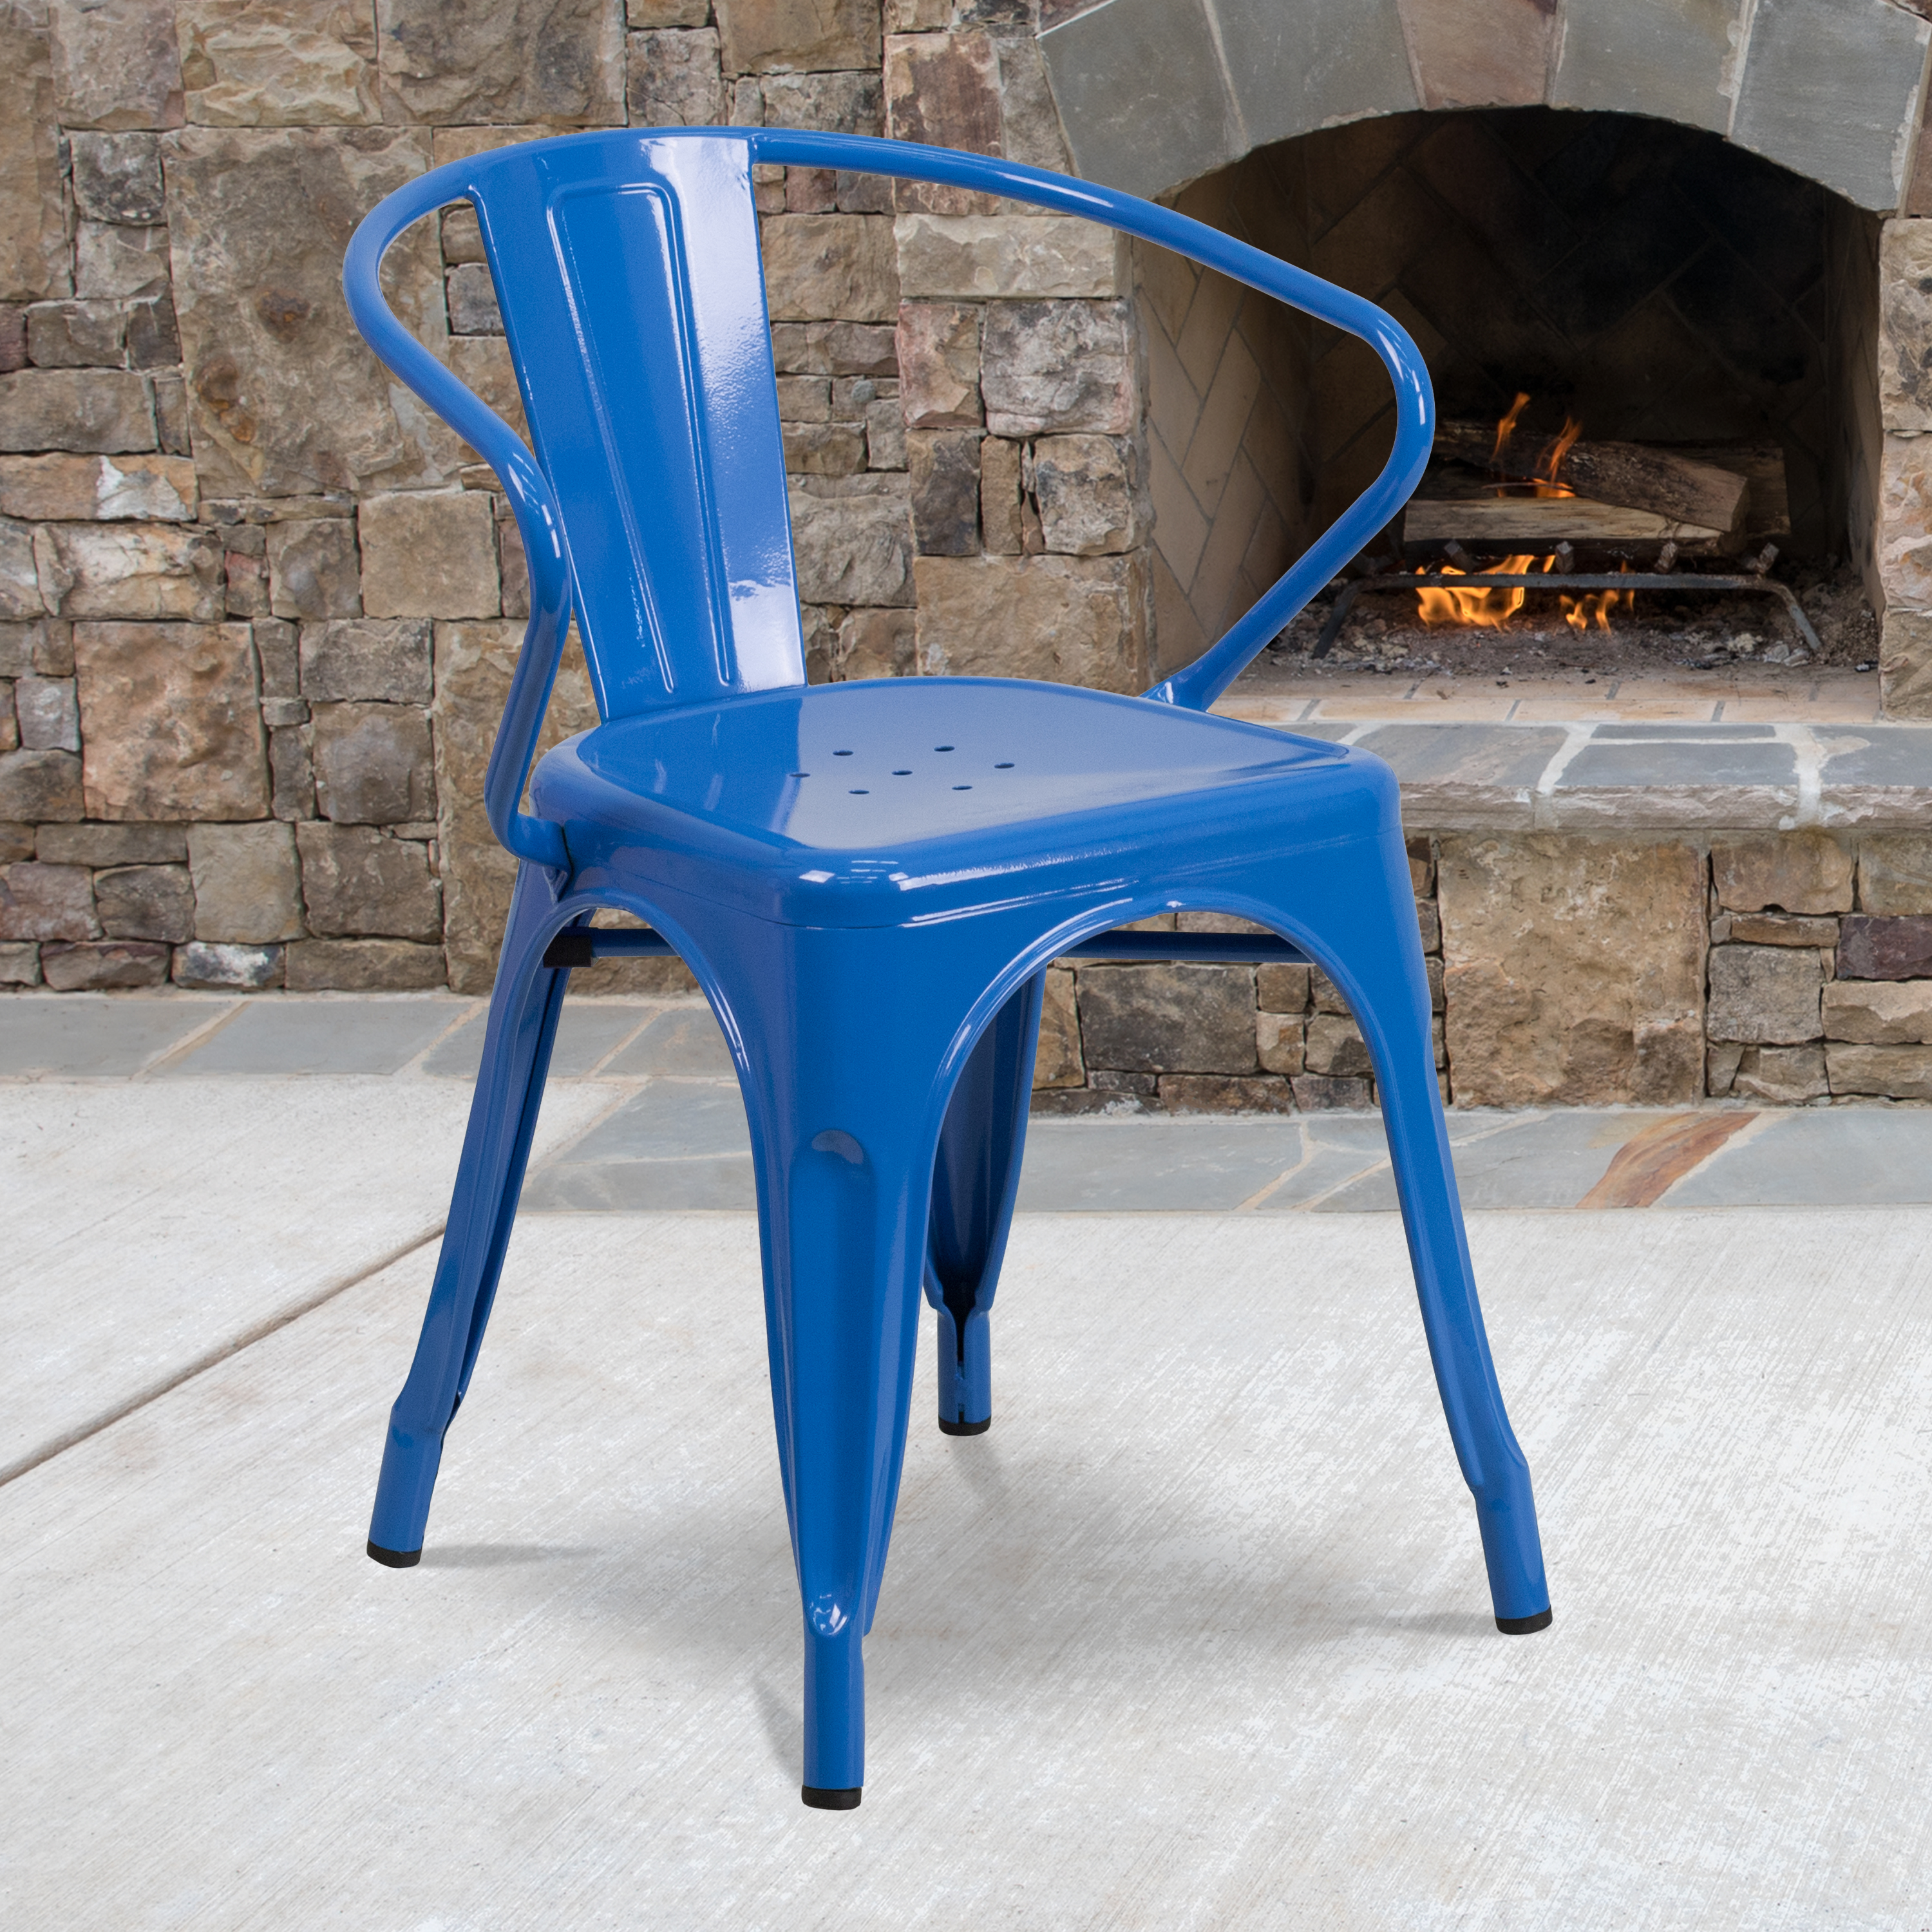 BizChair Commercial Grade 4 Pack Blue Metal Indoor-Outdoor Chair with Arms - image 1 of 14